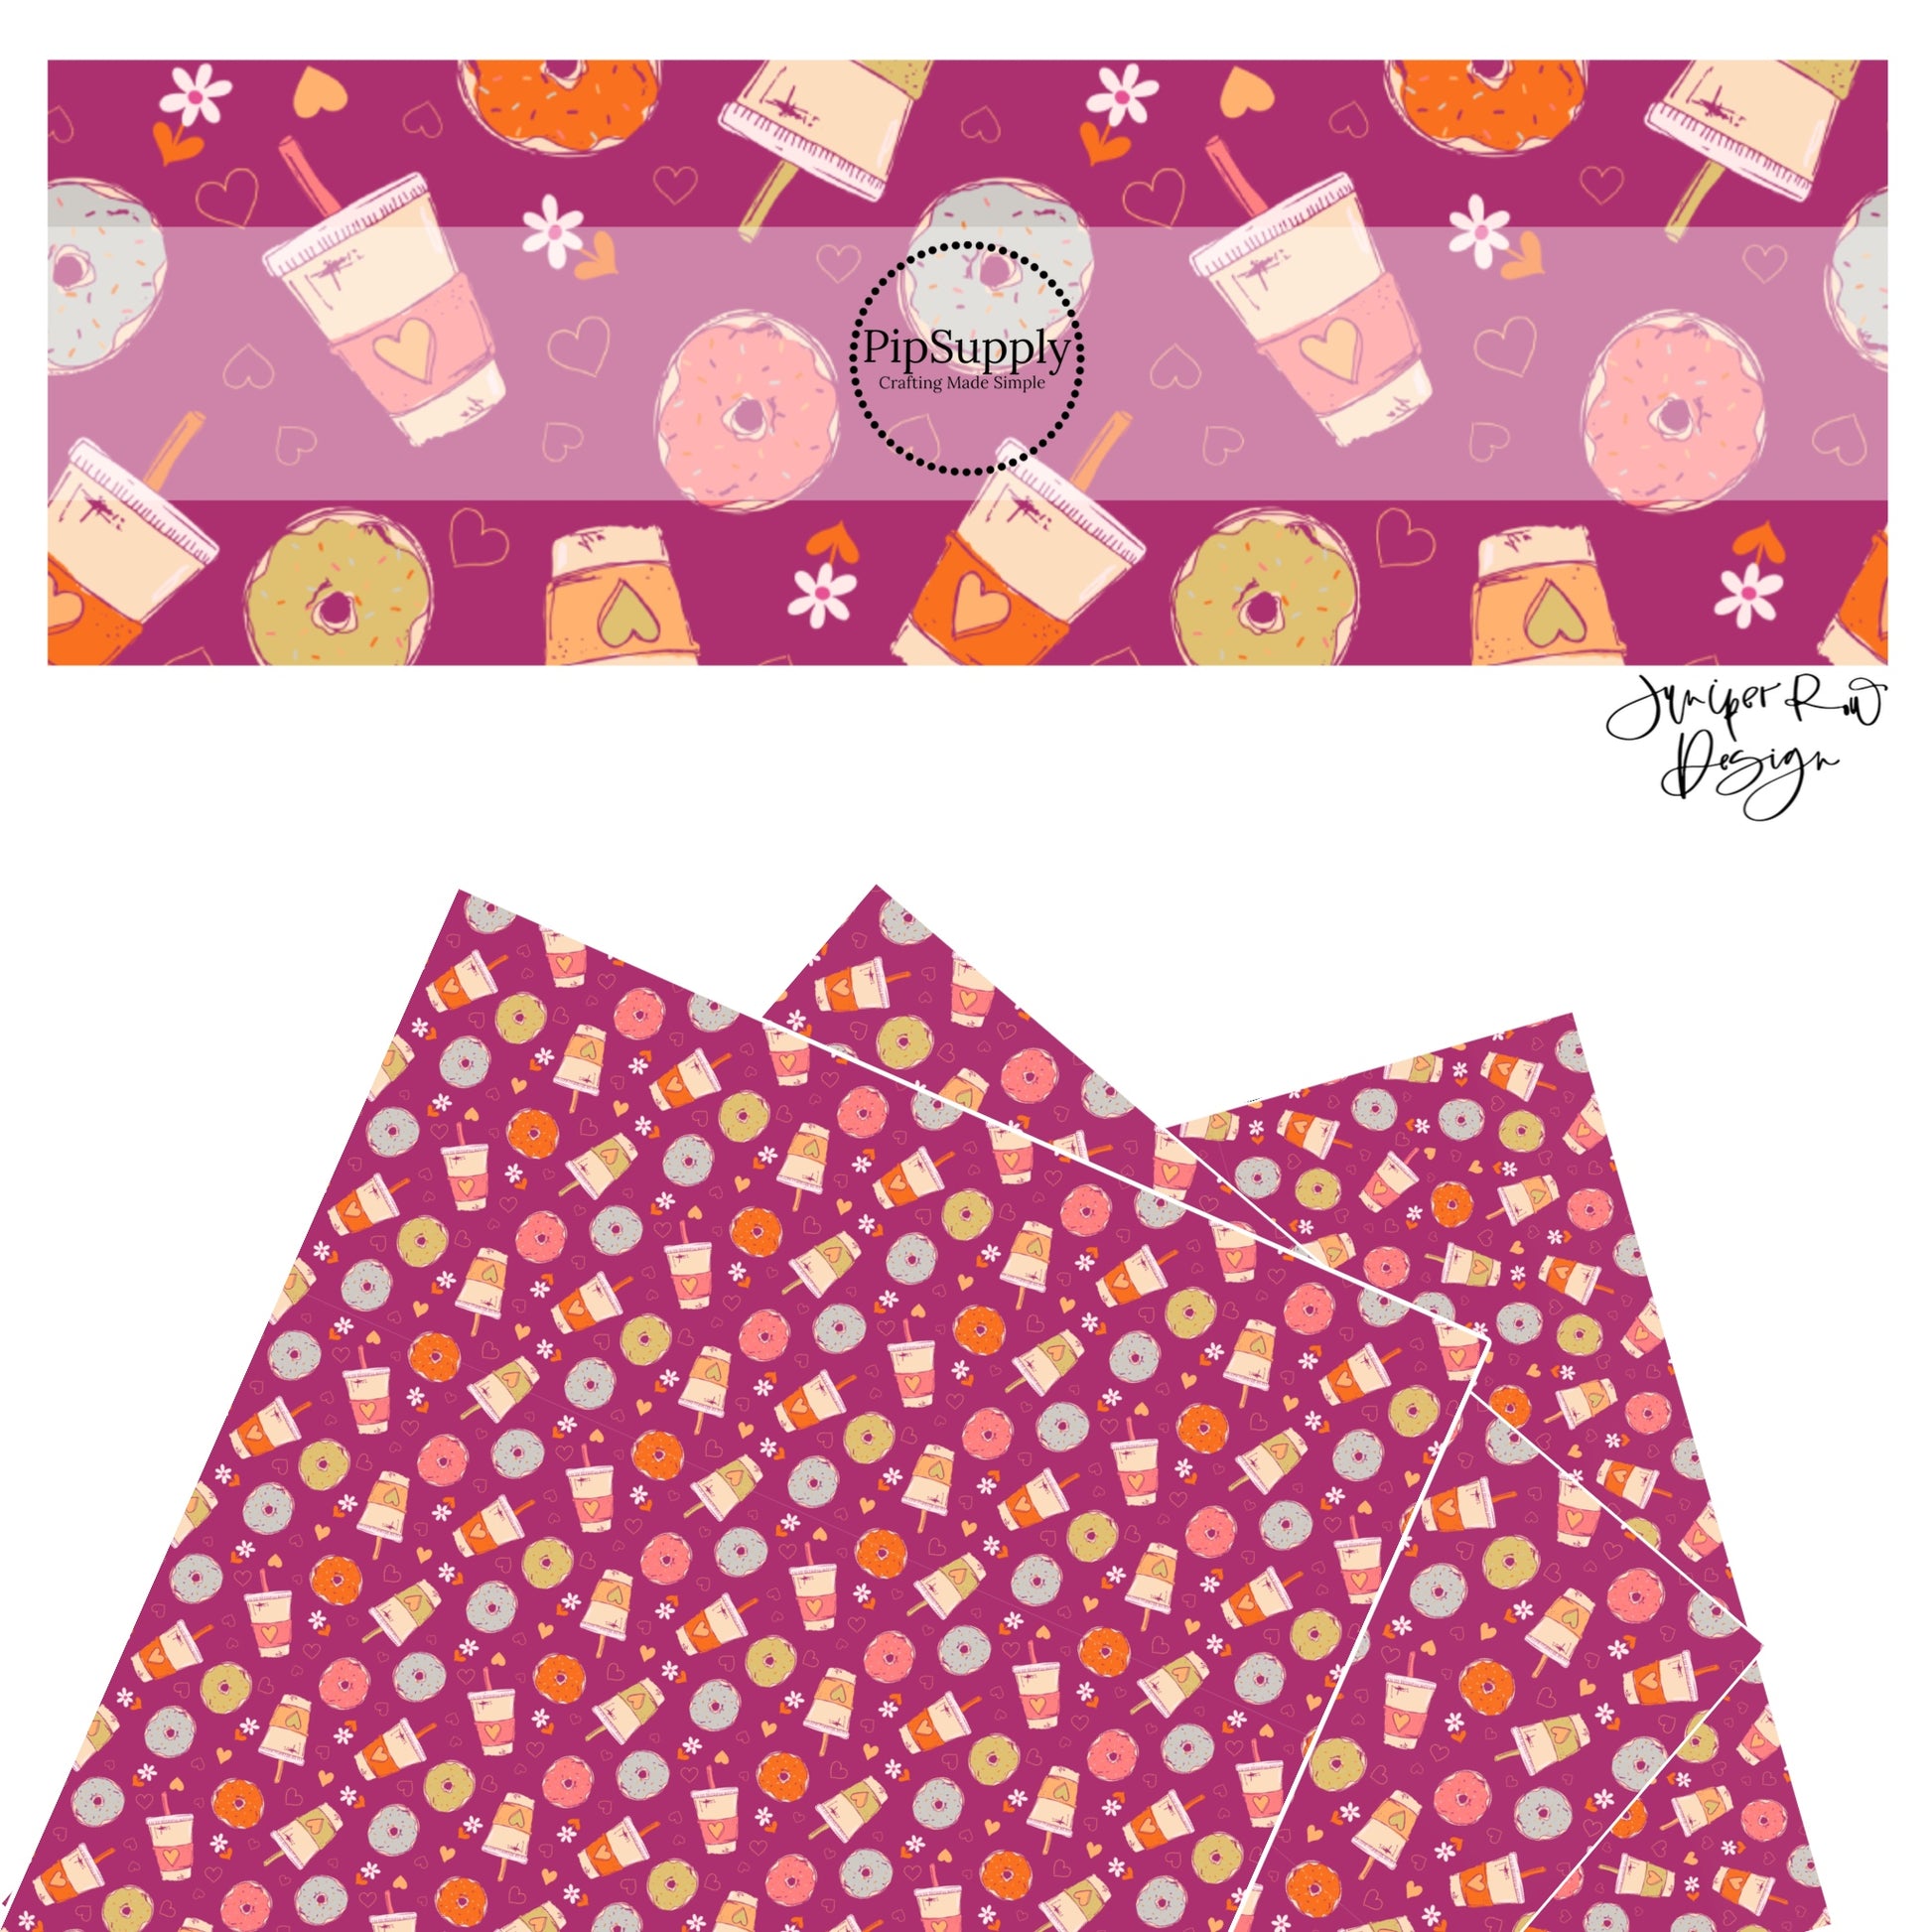 These Valentine's pattern themed faux leather sheets contain the following design elements: donuts and lattes on purple. Our CPSIA compliant faux leather sheets or rolls can be used for all types of crafting projects.